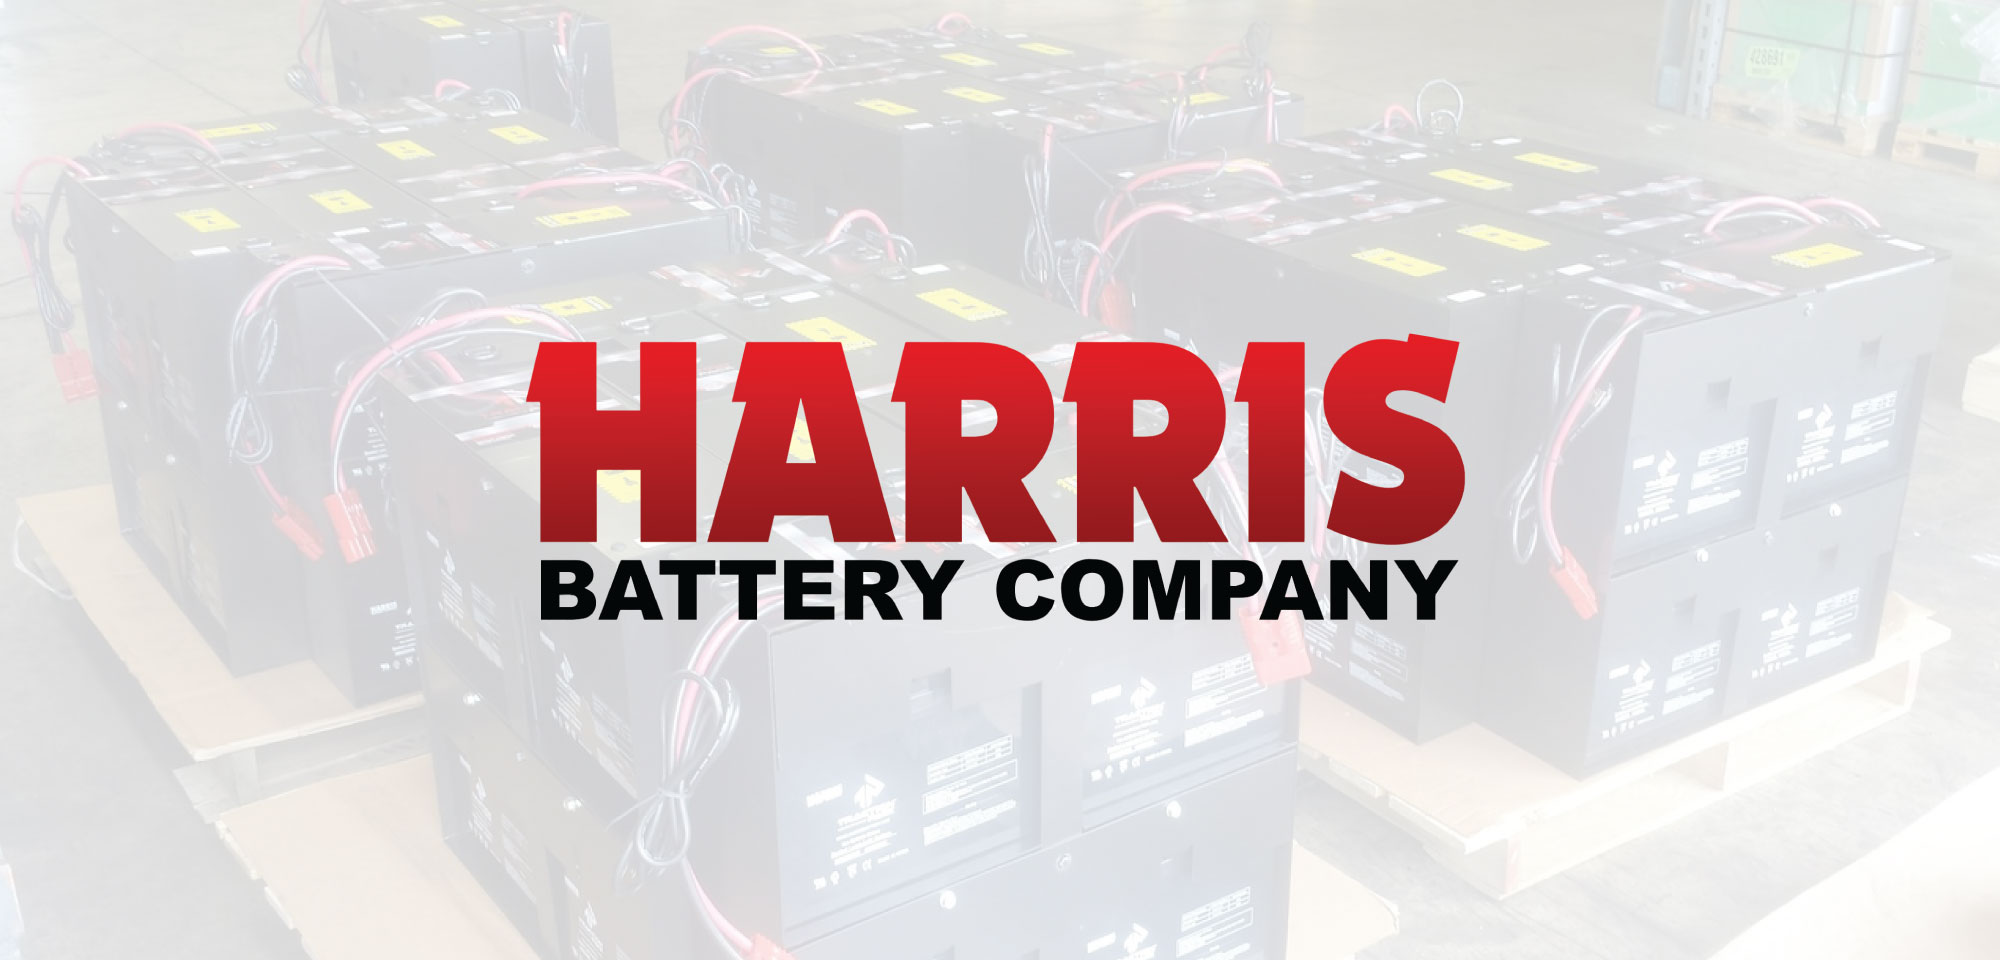 Complete review of Harris Battery